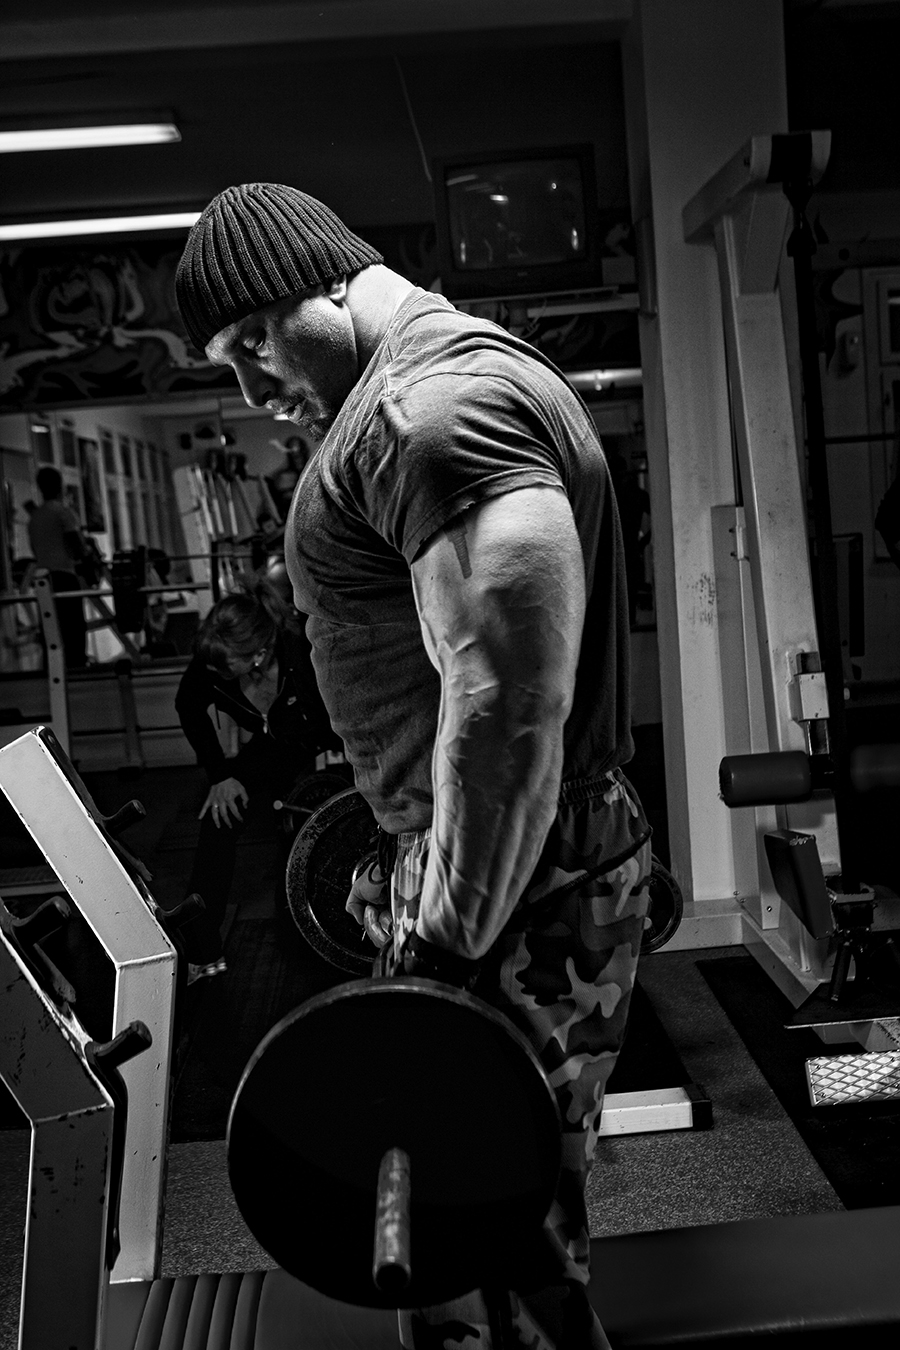 3 Tips to Add the "Right Kind of Size" When Using a Weight Gainer